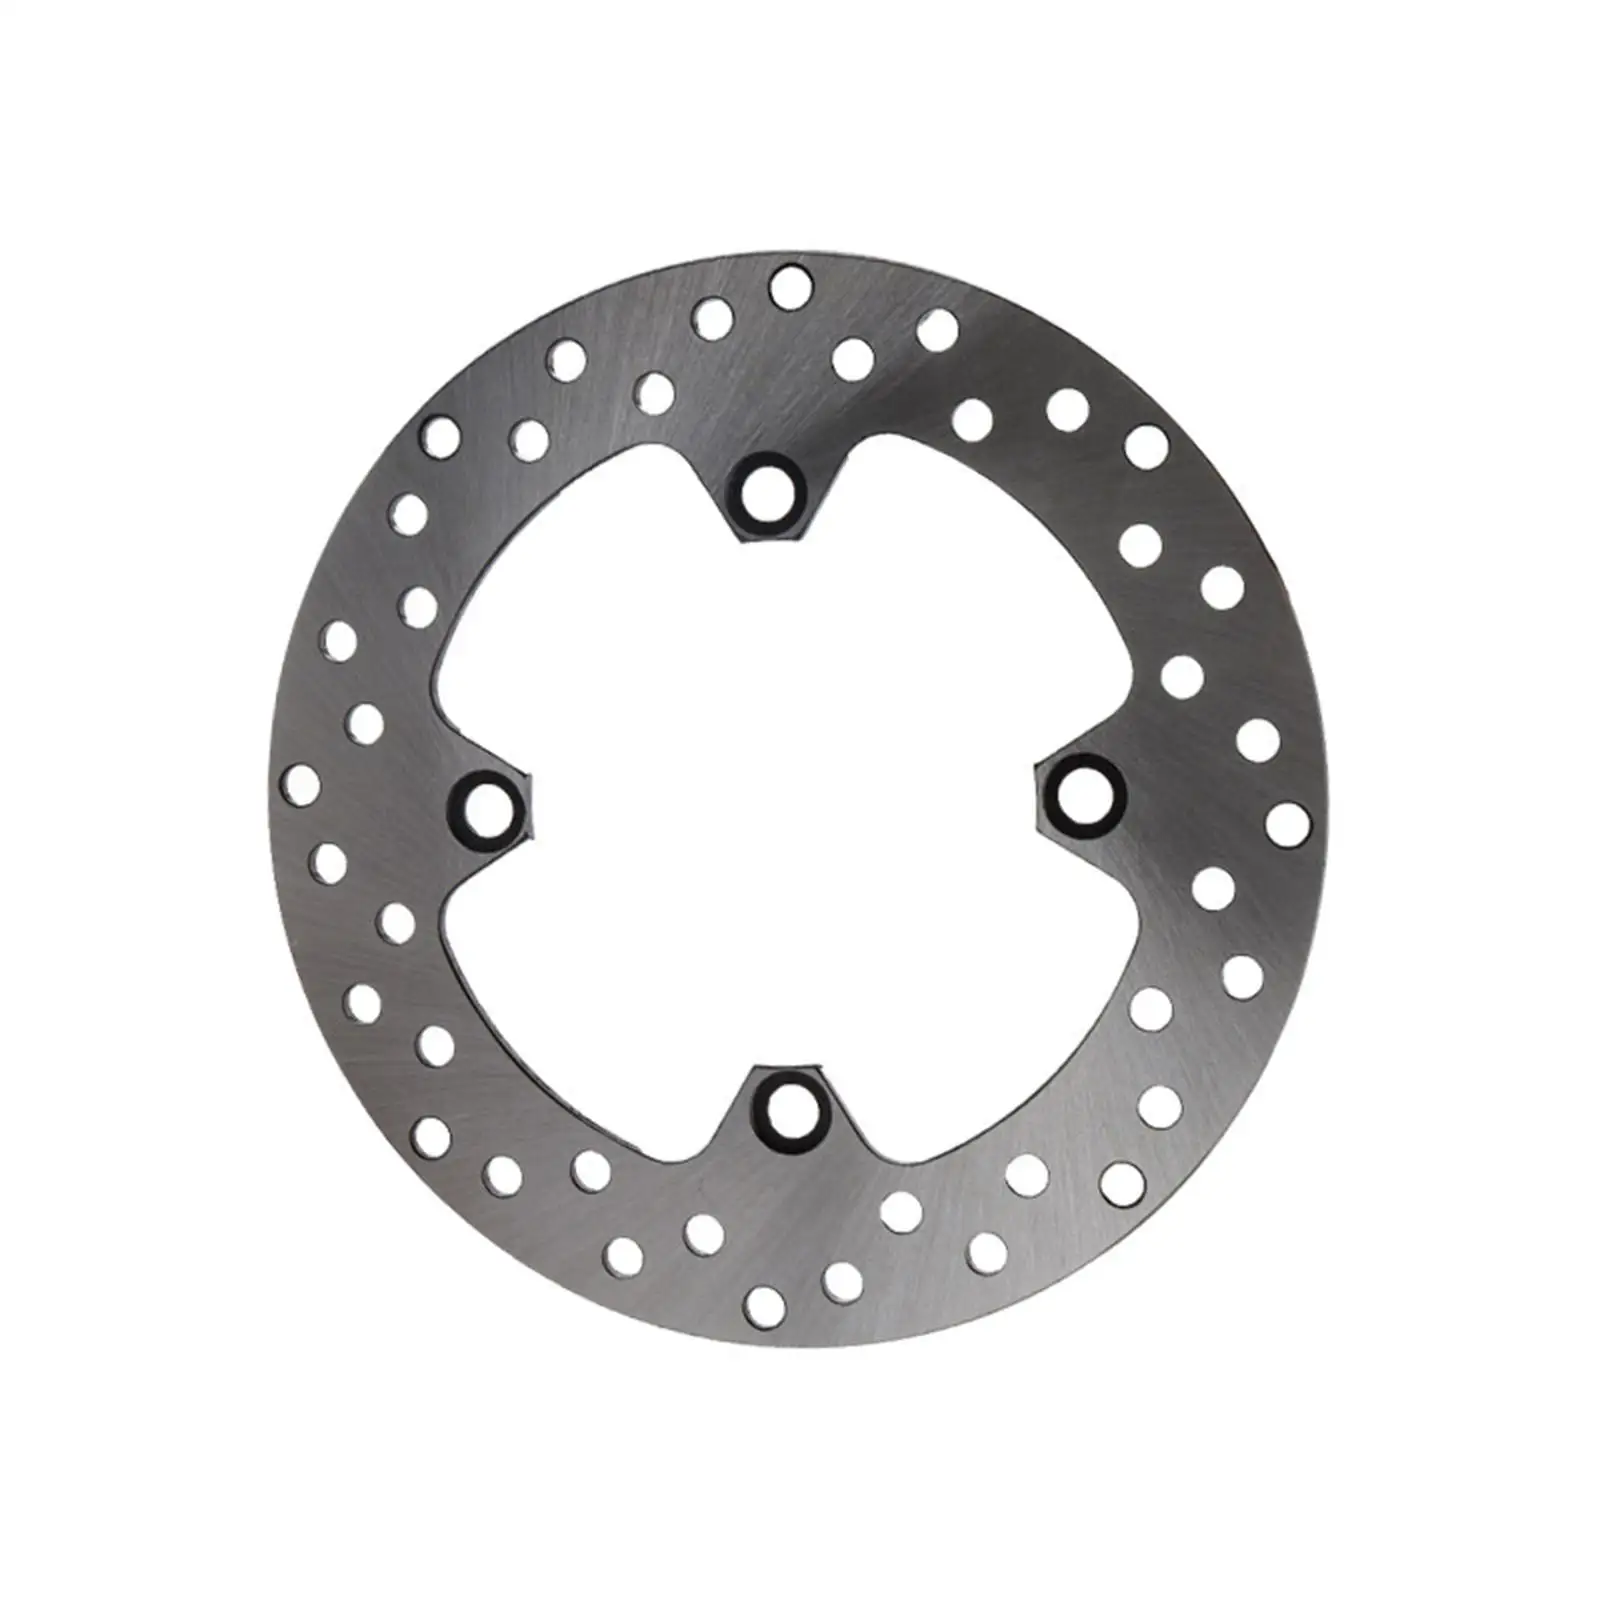 Motorcycle Brake Disc Durable Replacement Stainless Steel Accessory High Strength for Honda XR400 XR250R TRX400EX XR600R